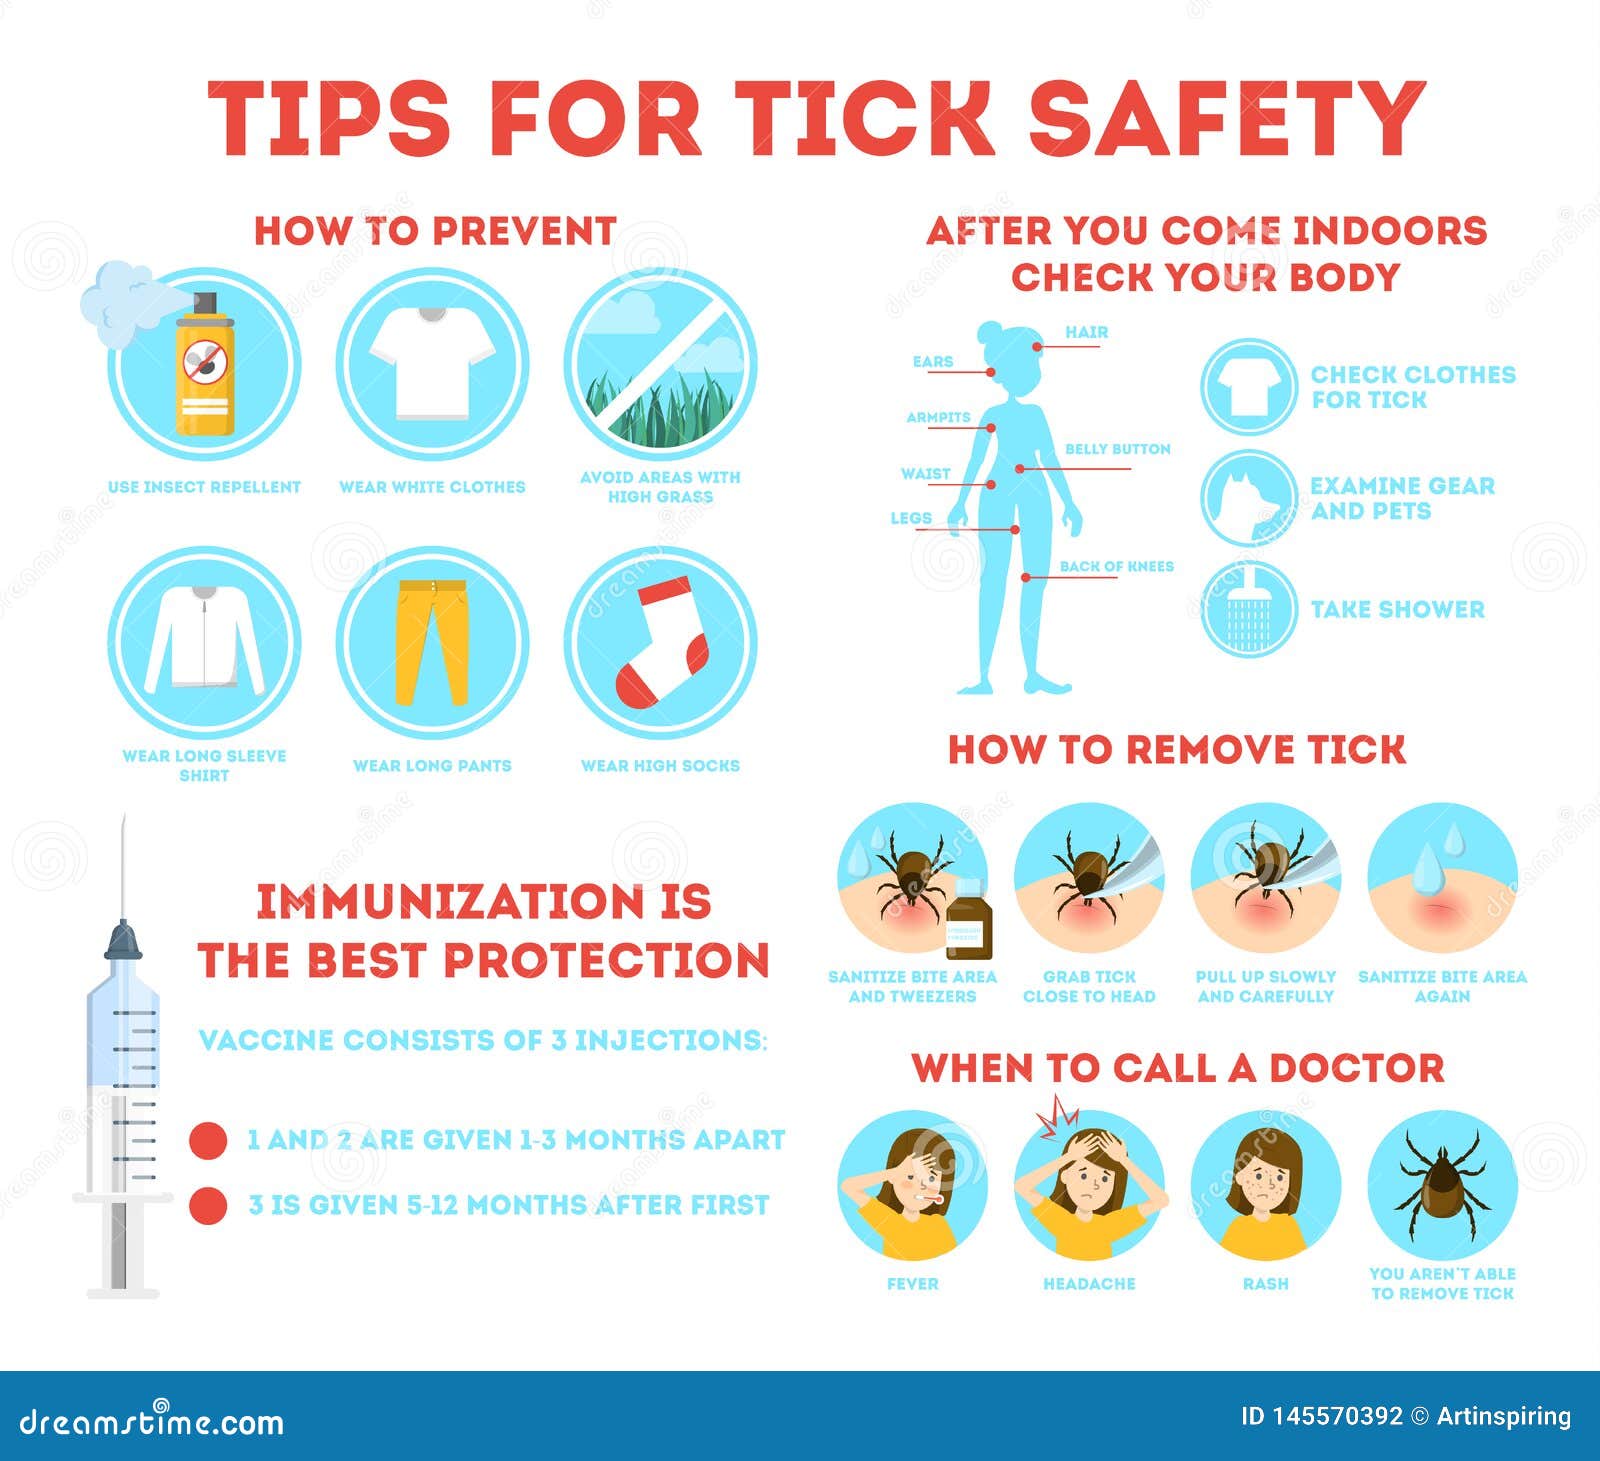 tips for tick safety infographic. how to protect skin